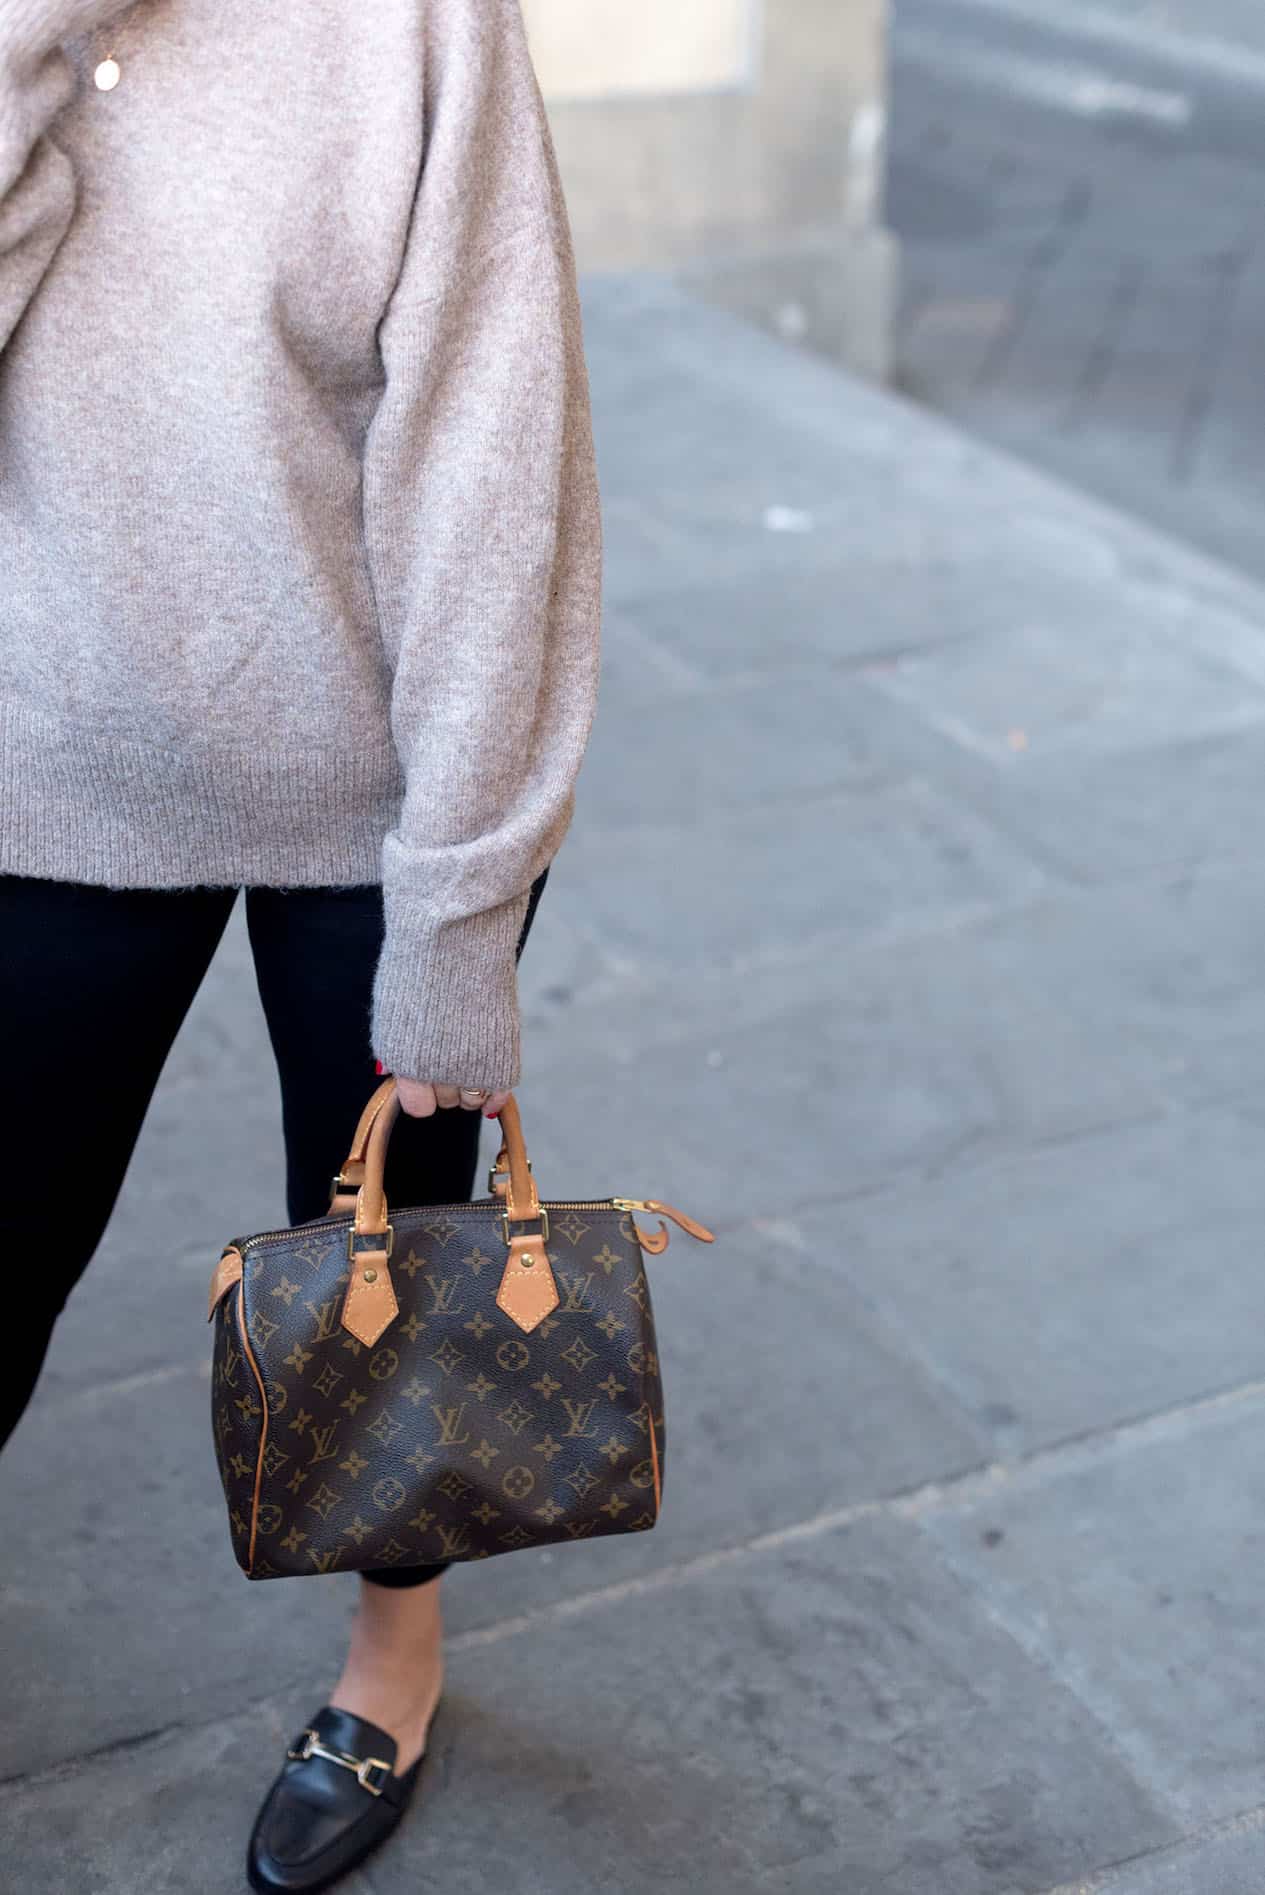 image of the side of a woman's body wearing black pants, a grey sweater, black loafers, and holding a Louis Vuitton bag in one hand